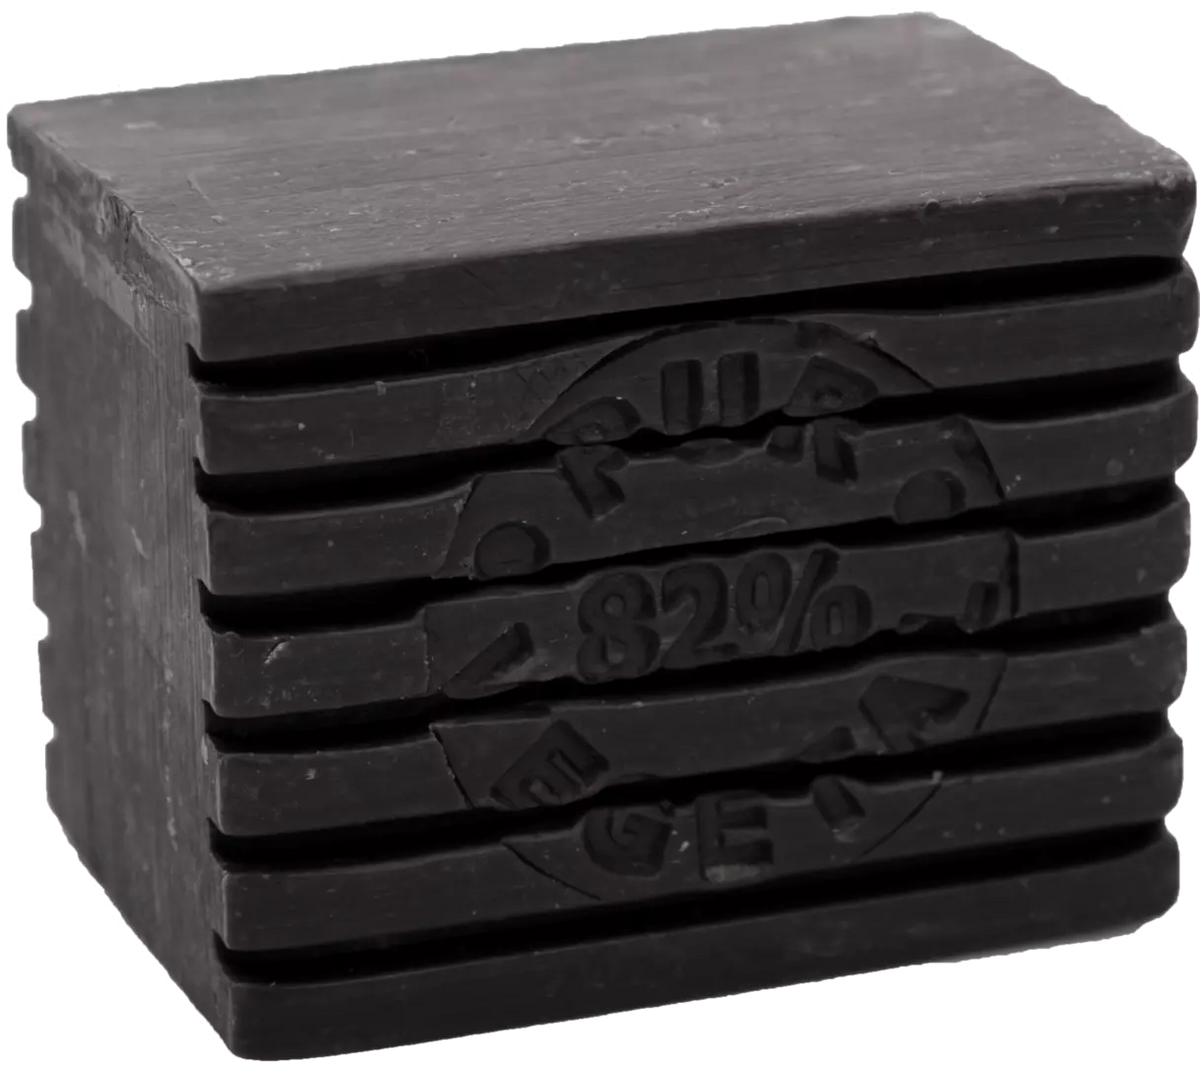 A stack of five La Savonnerie de Nyons Black Olive striped soaps, each weighing 300gm, with a matte finish and symmetrically arranged, highlighting their high cocoa content.